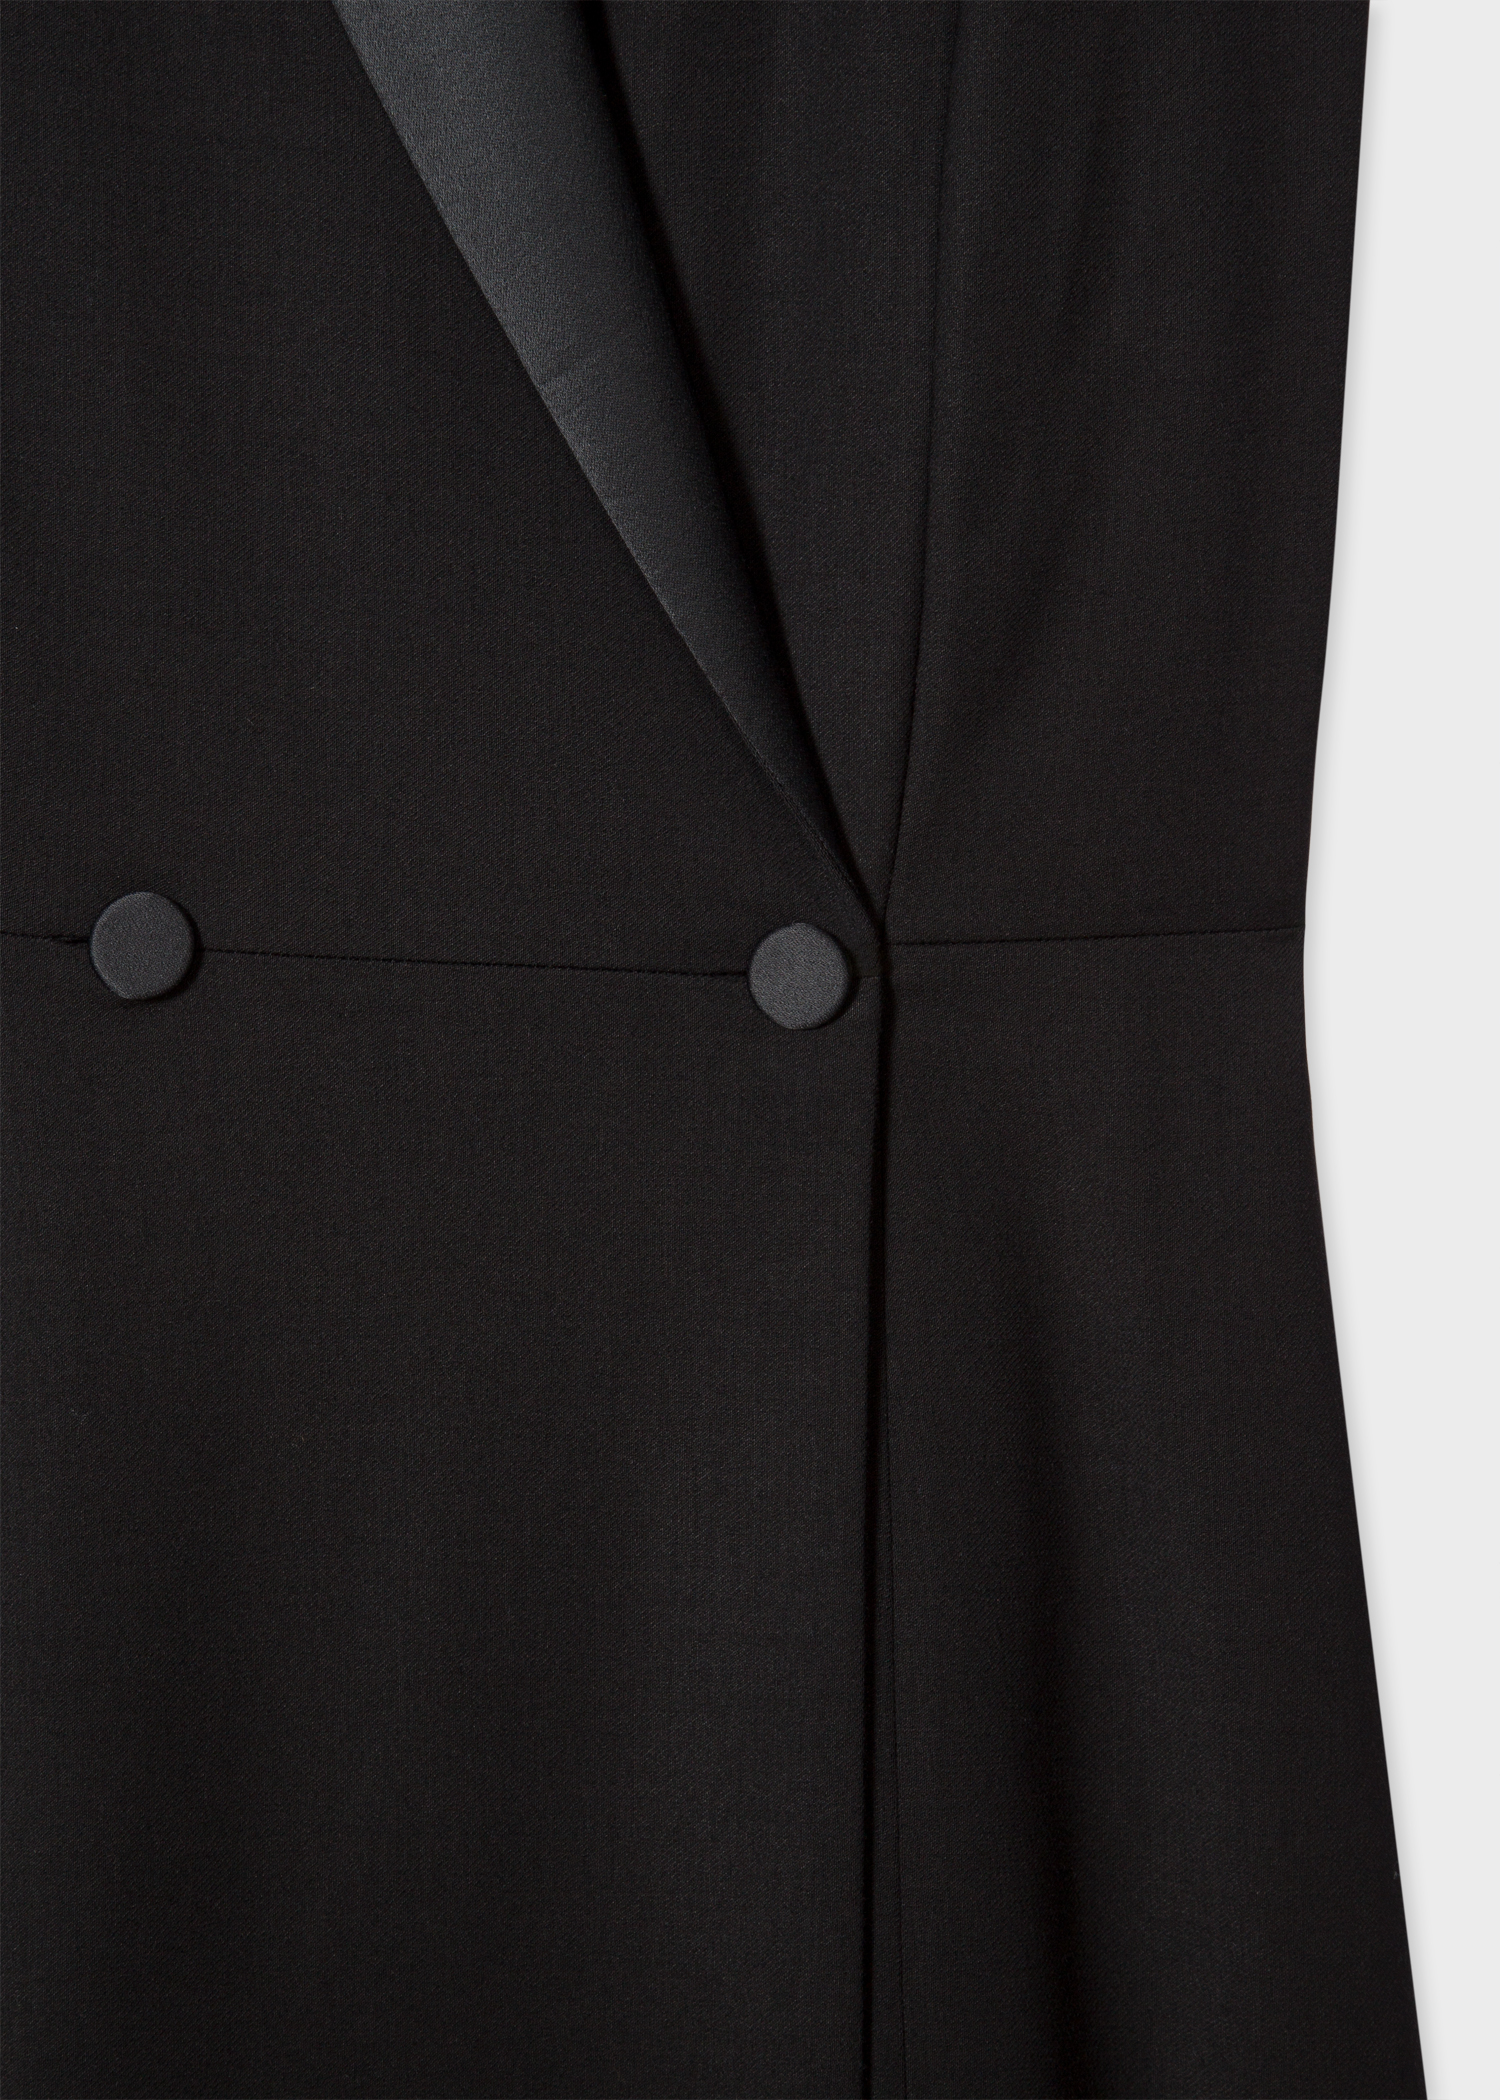 Button View - Women's Black Tuxedo Double-Breasted Dress With Satin Detail Paul Smith